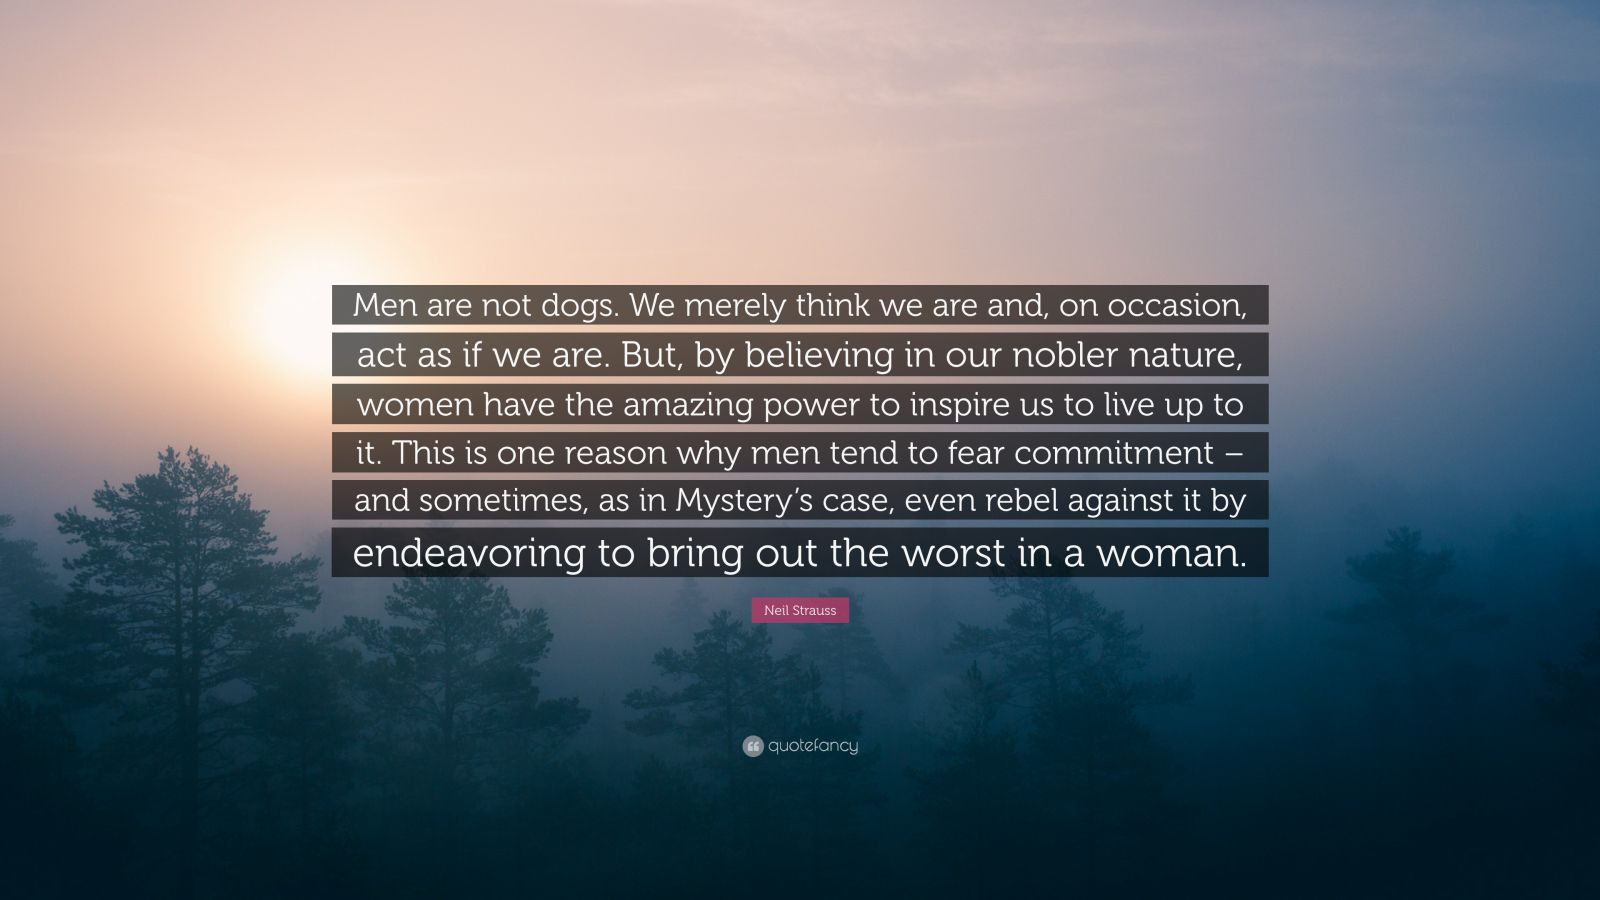 Neil Strauss Quote: “Men are not dogs. We merely think we are and, on ...